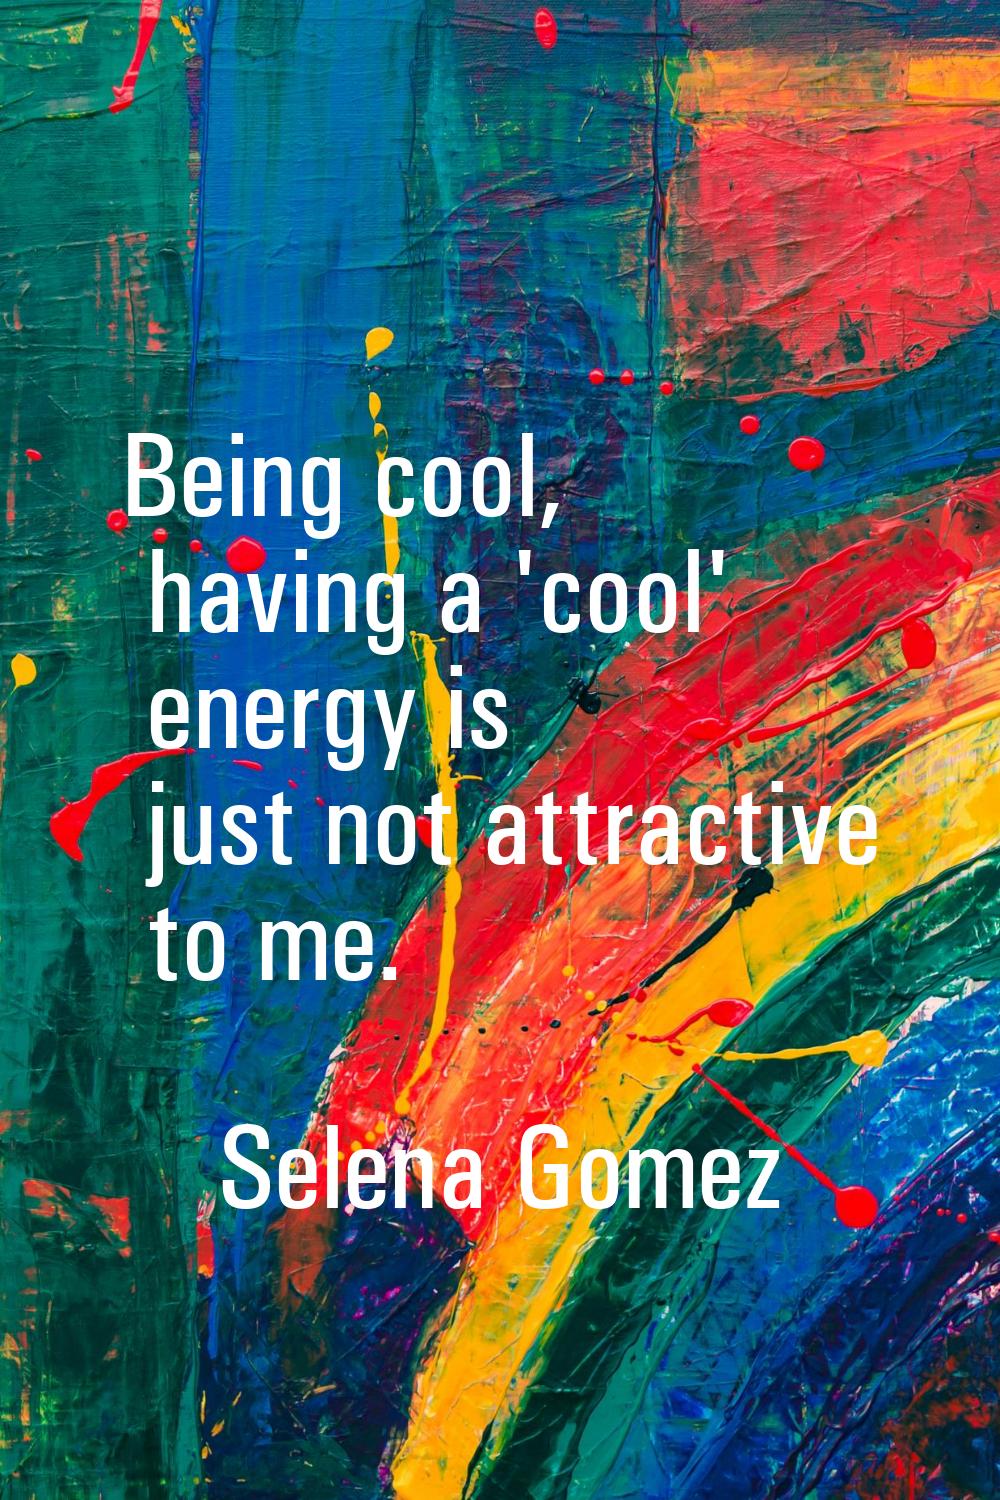 Being cool, having a 'cool' energy is just not attractive to me.